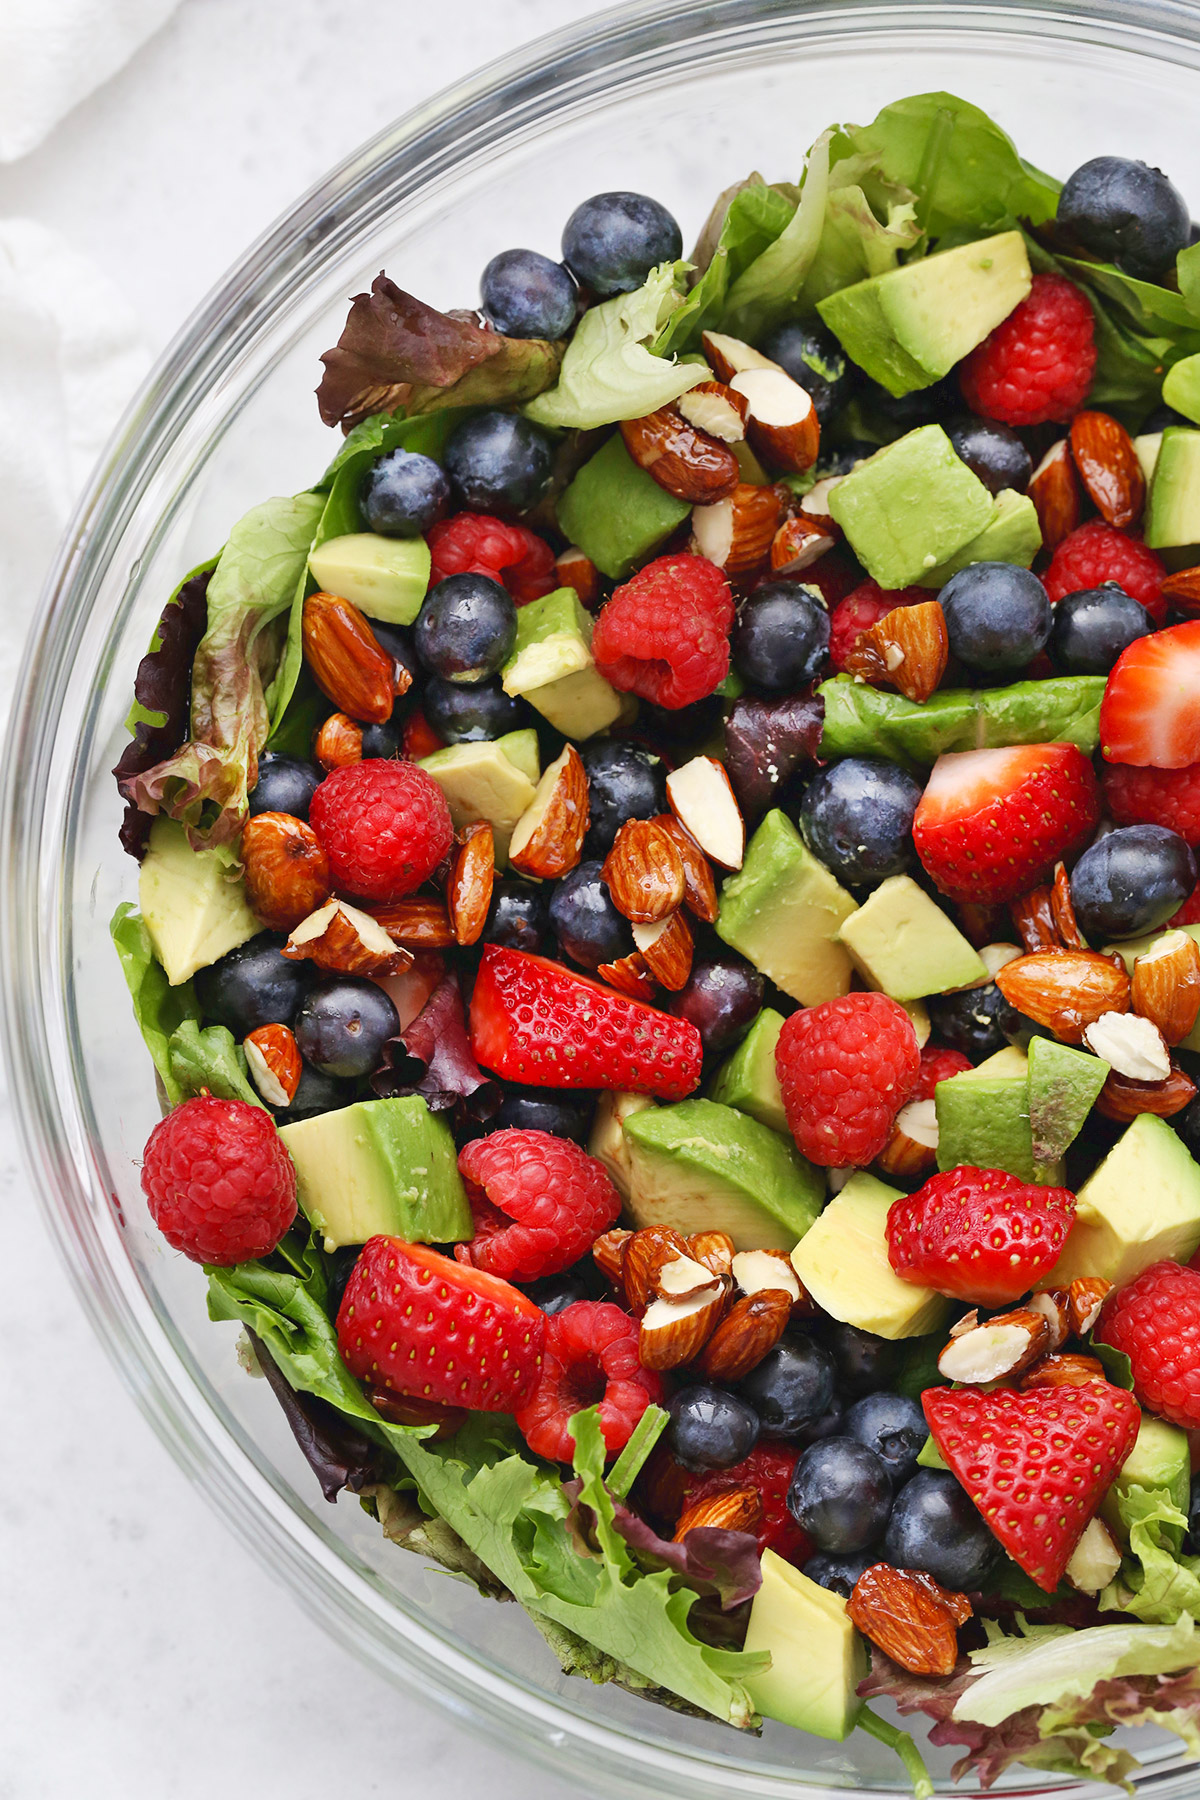 Mixed Berry Salad from One Lovely Life